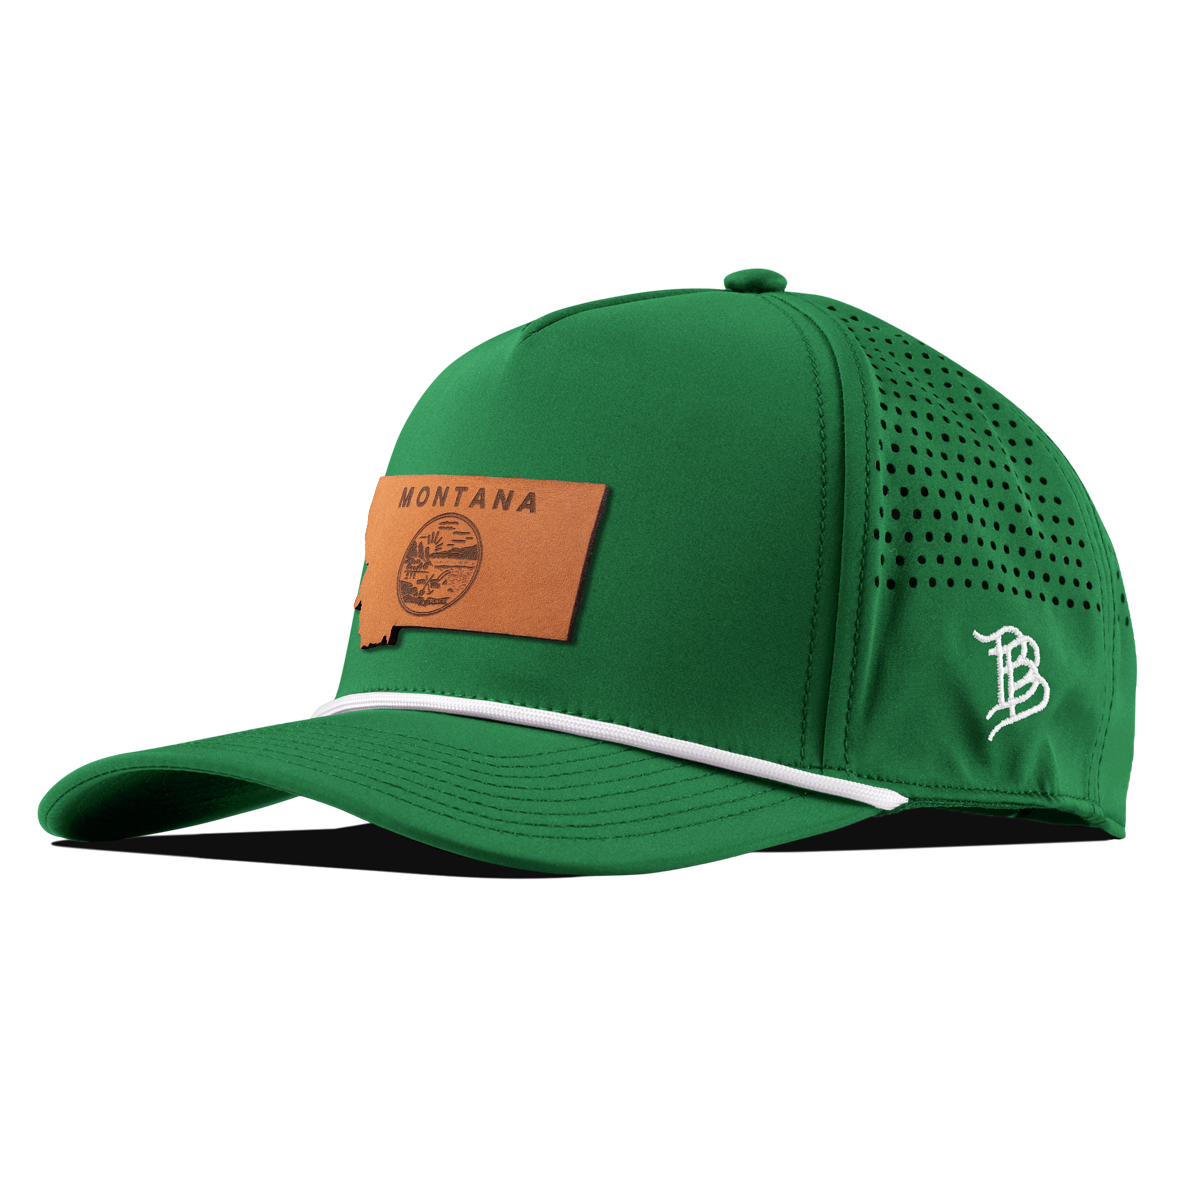 Montana 41 Tan Curved 5 Panel Rope Kelly Green